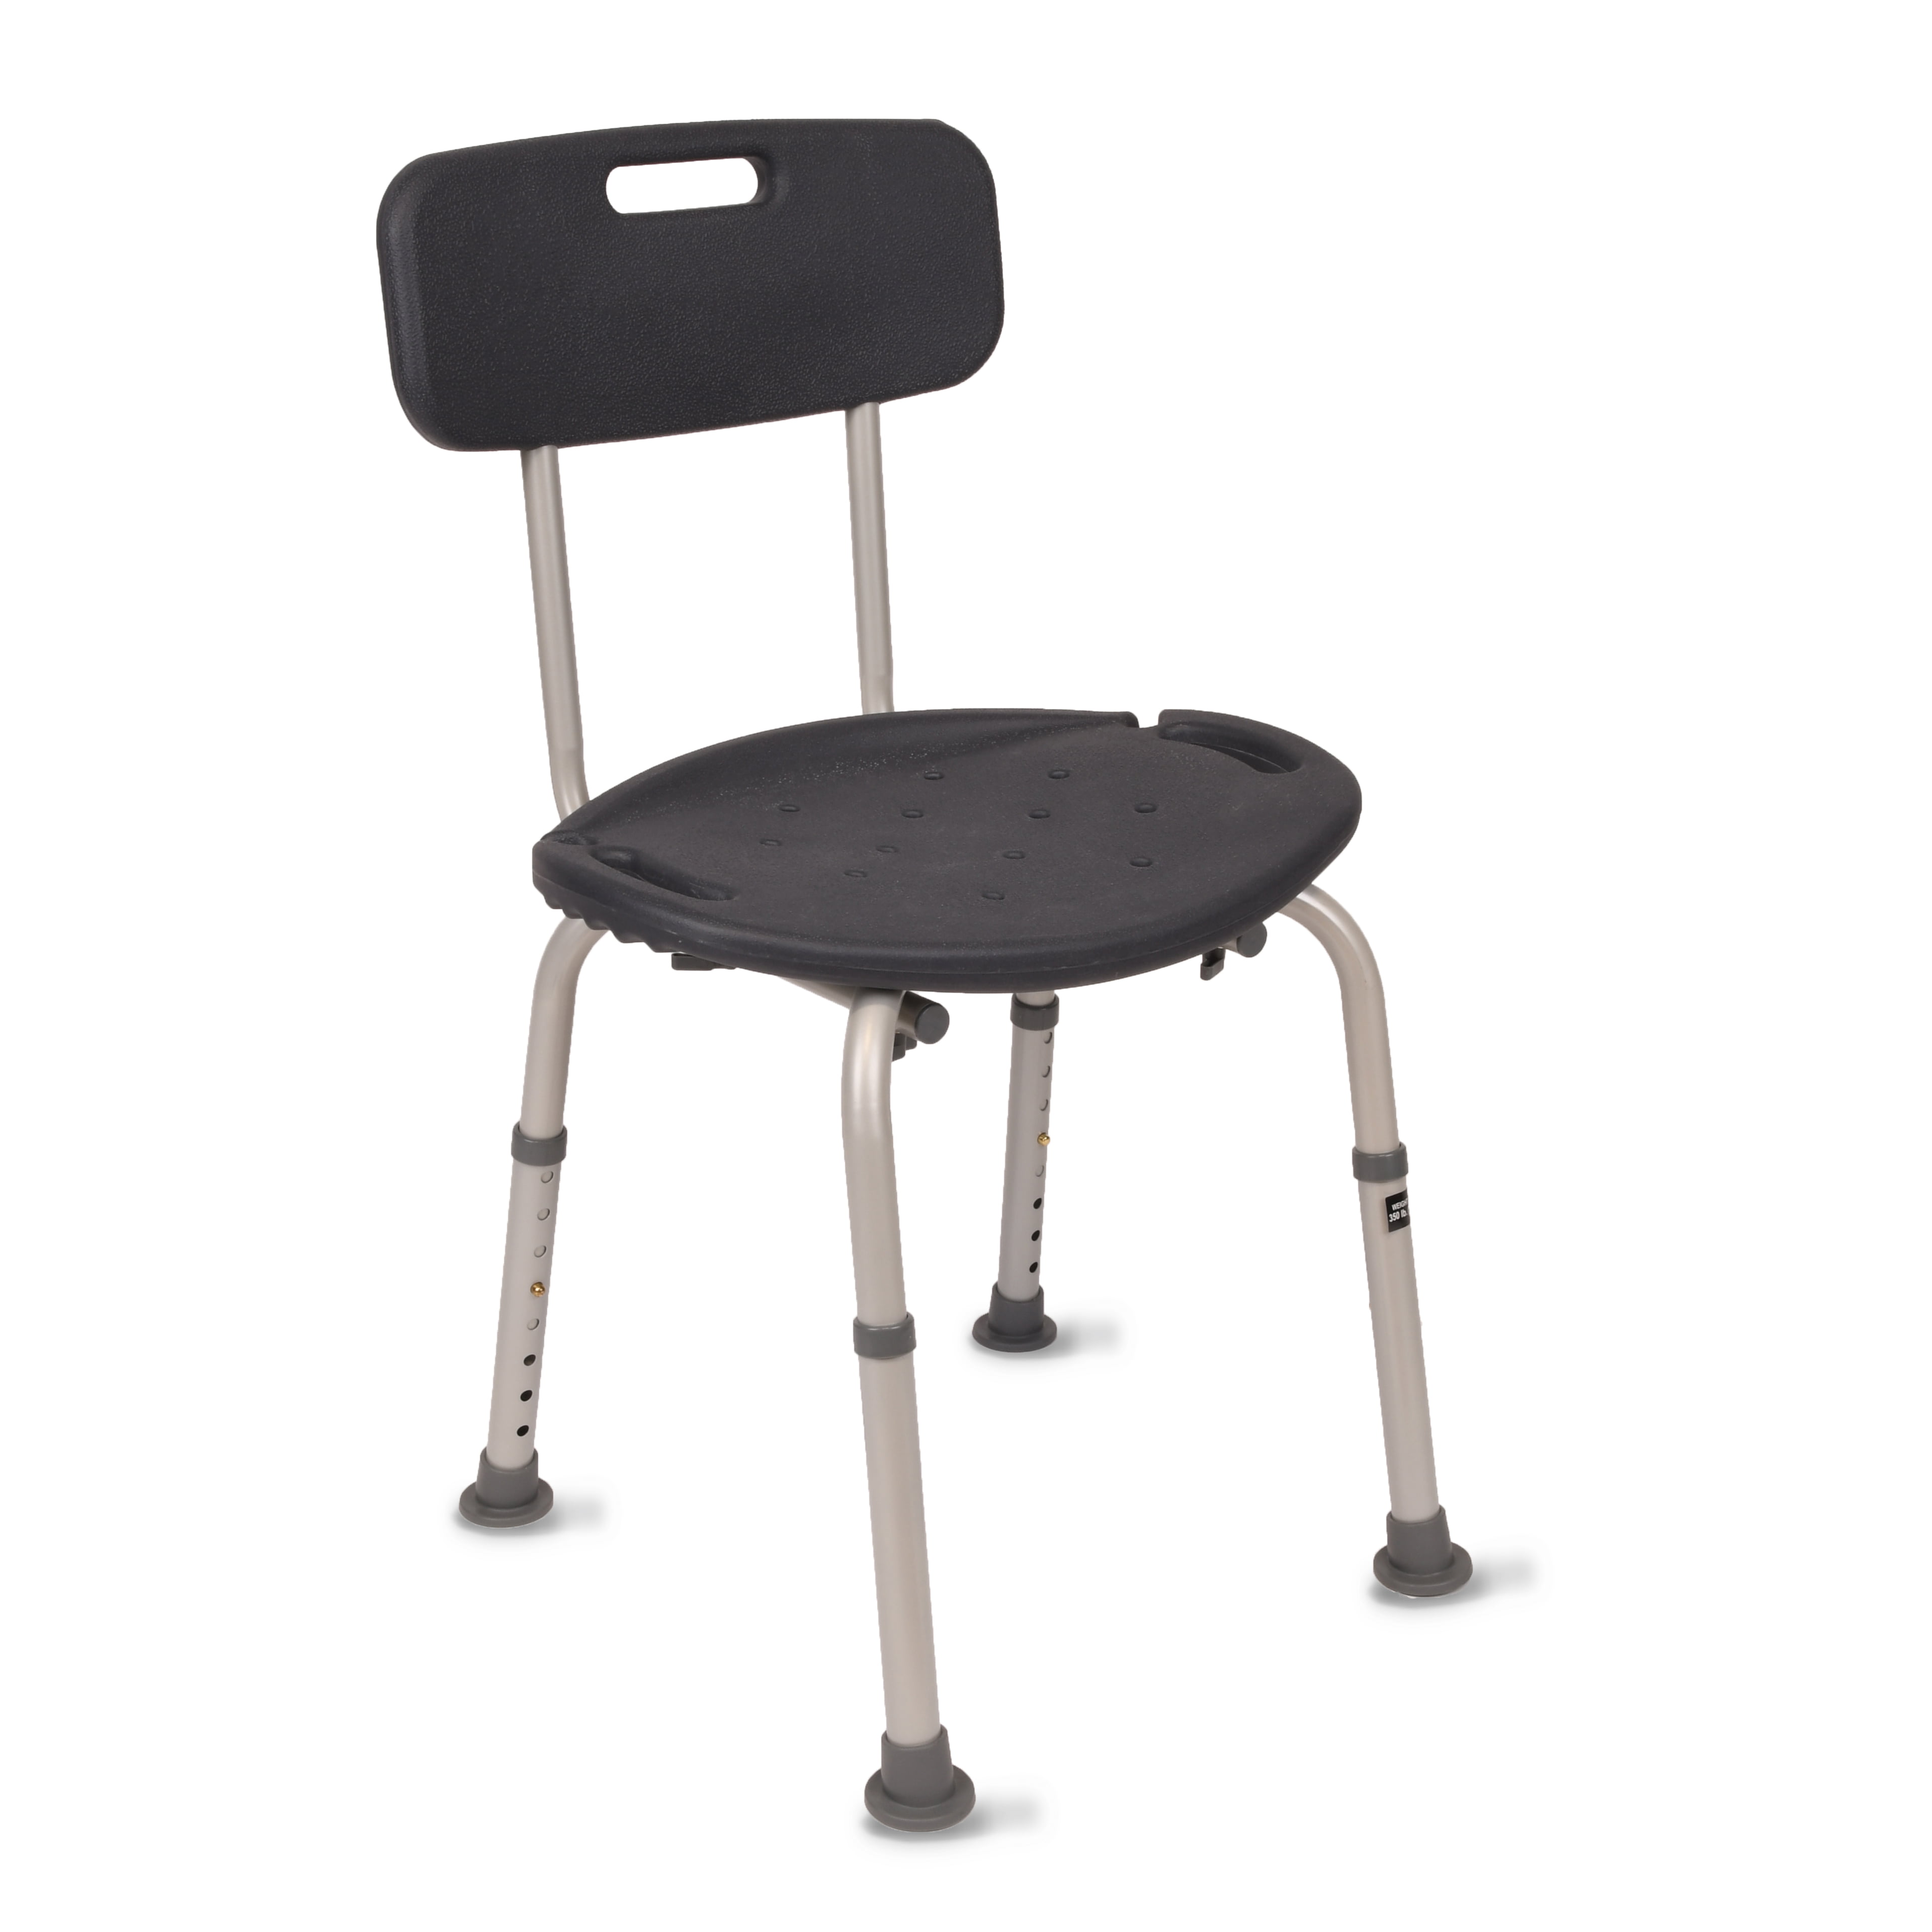 Equate Bath Chair \u0026 Shower Seat with 